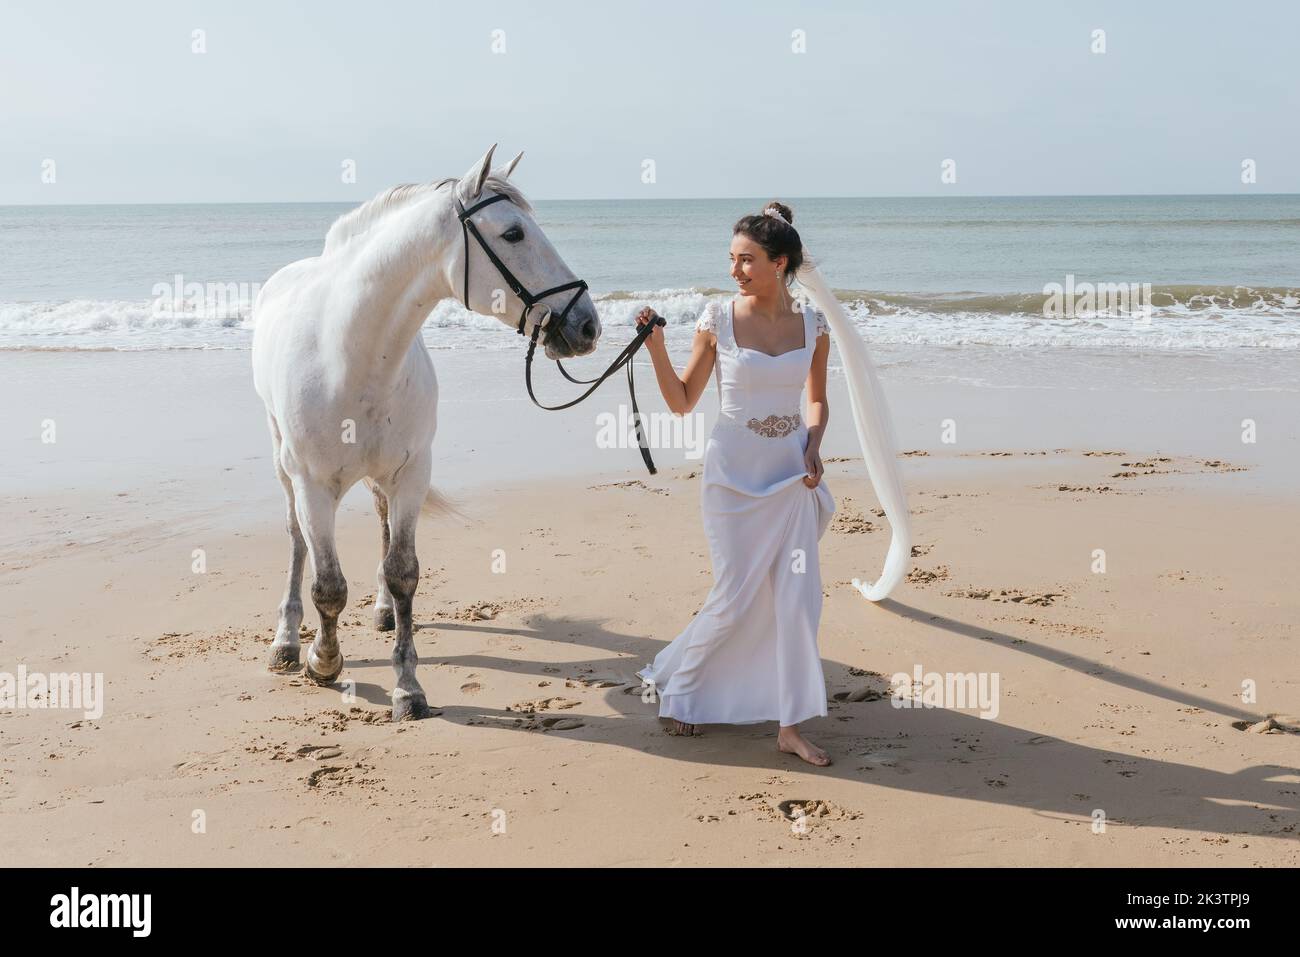 Cheerful woman in white dress leading purebred mare by reins while looking at each other on sandy ocean shore Stock Photo